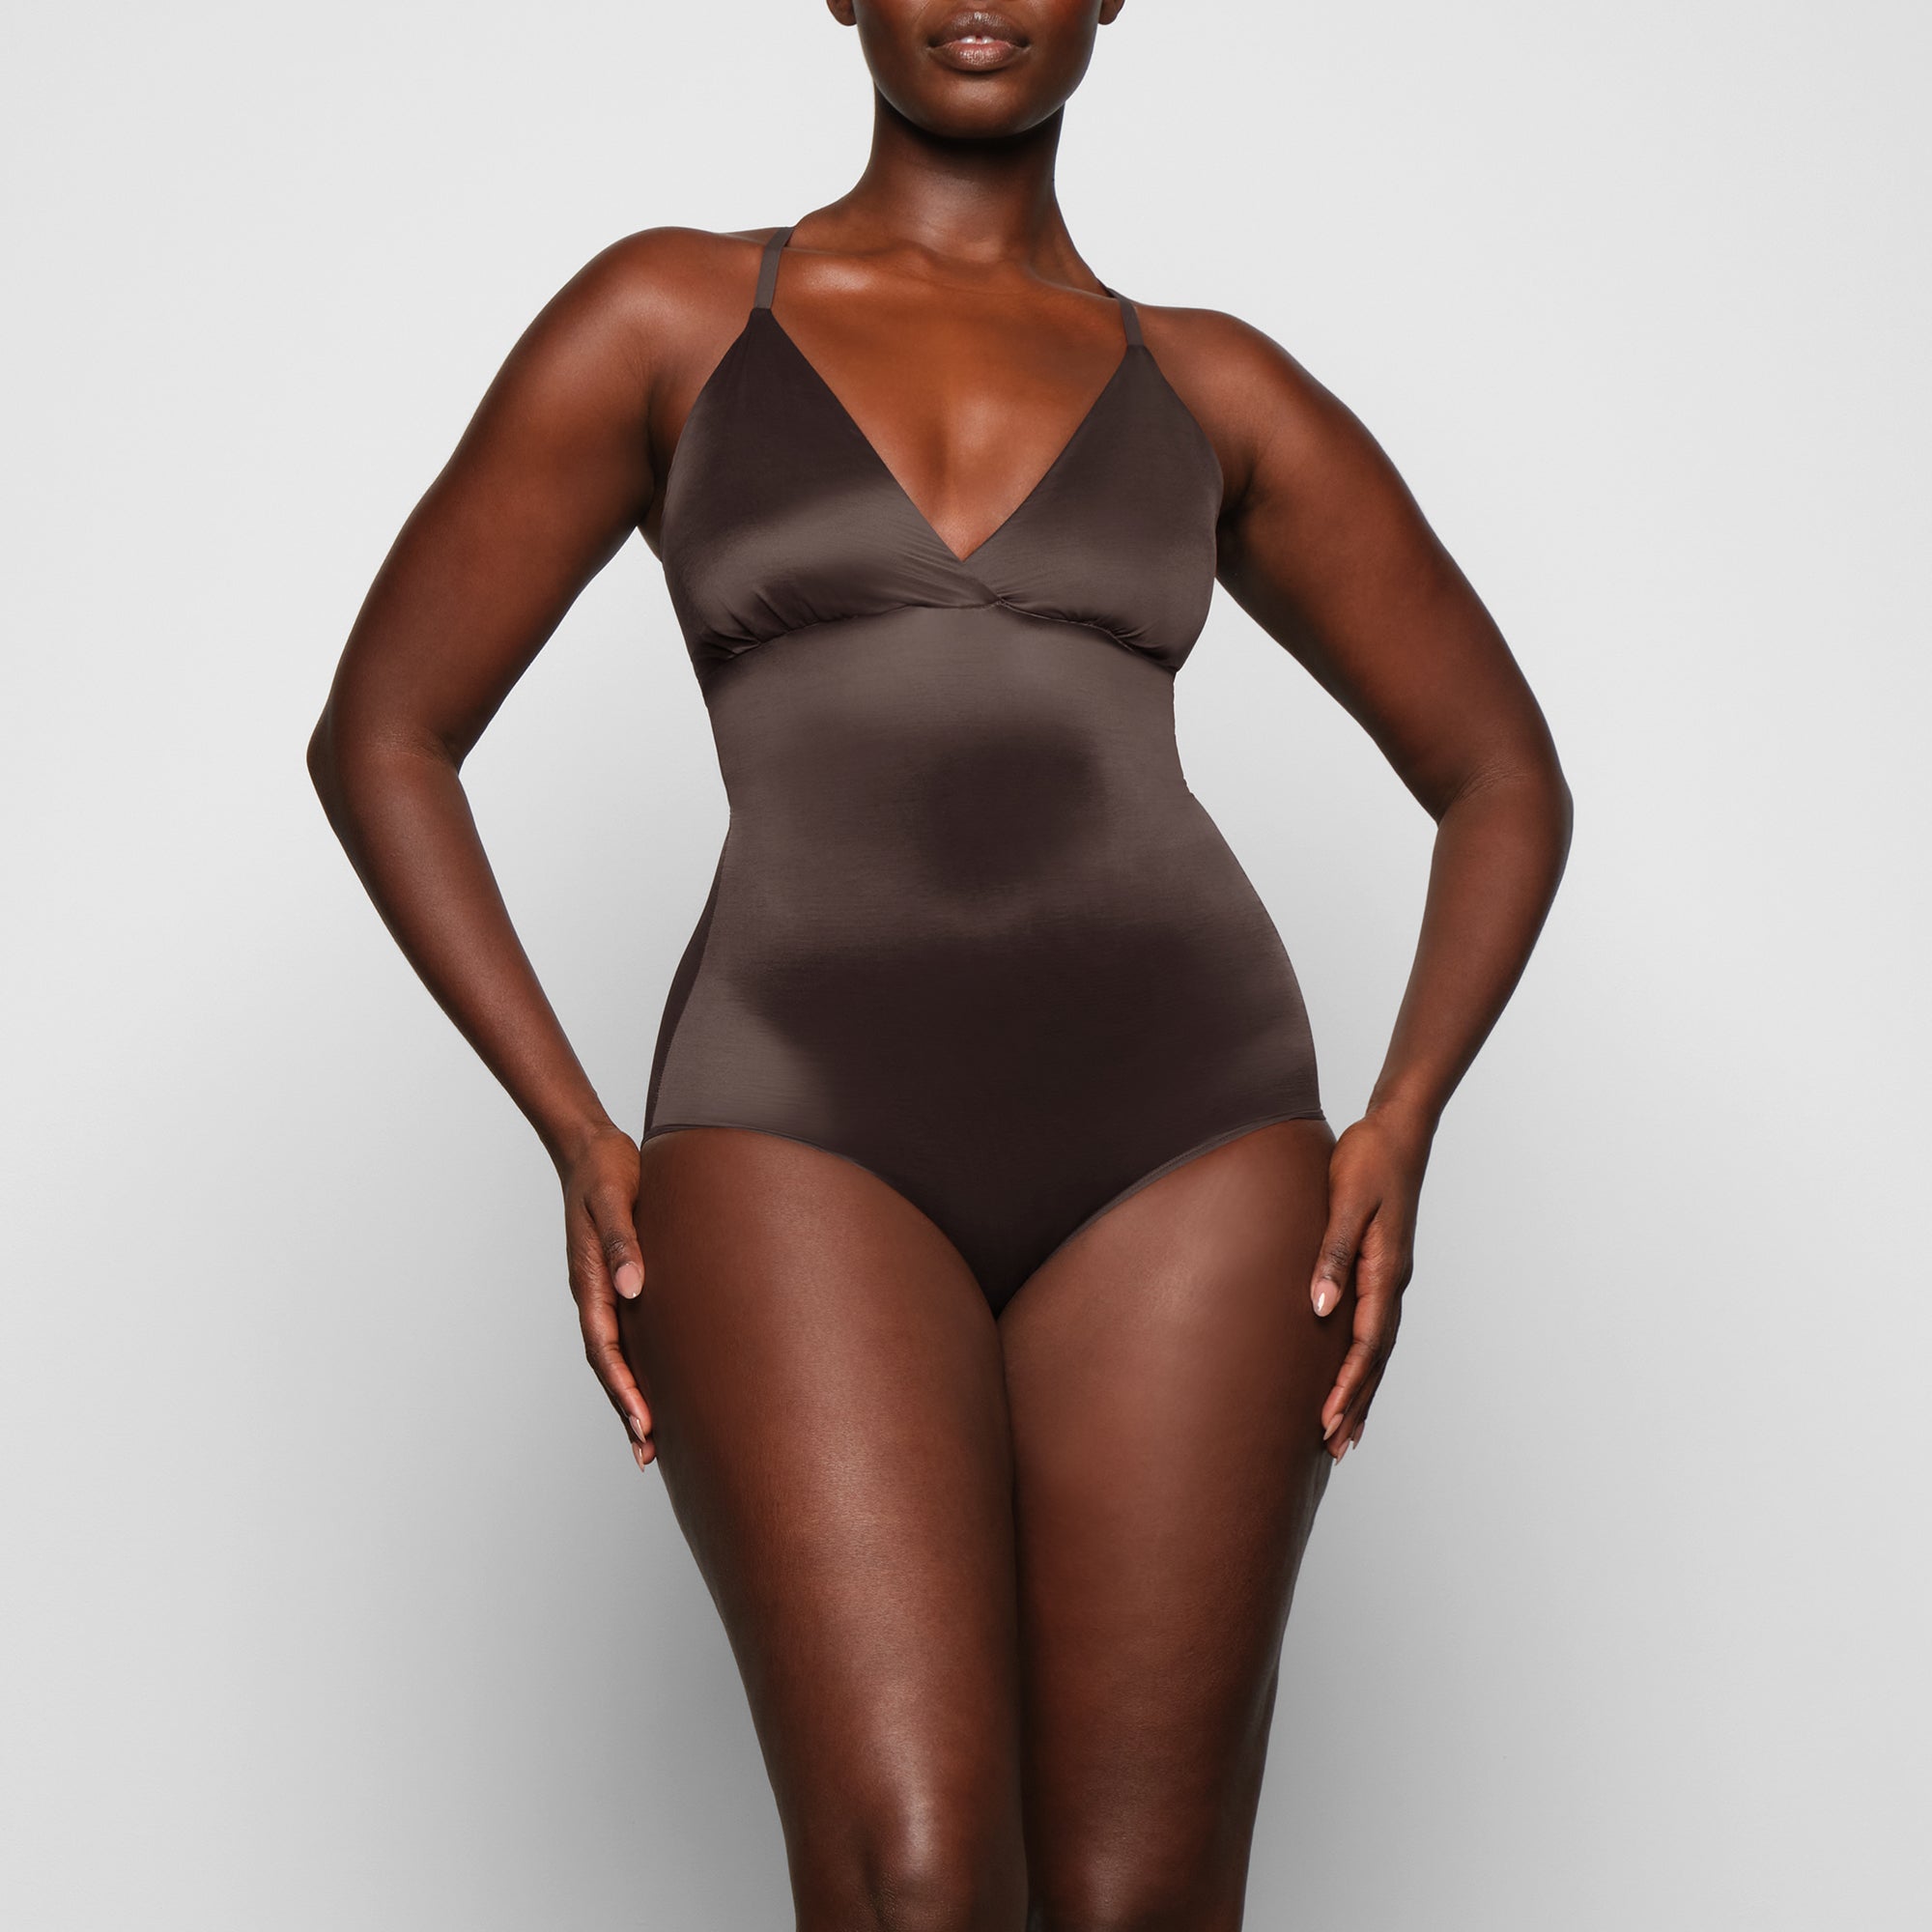 BARELY THERE BODYSUIT BRIEF W/ SNAPS